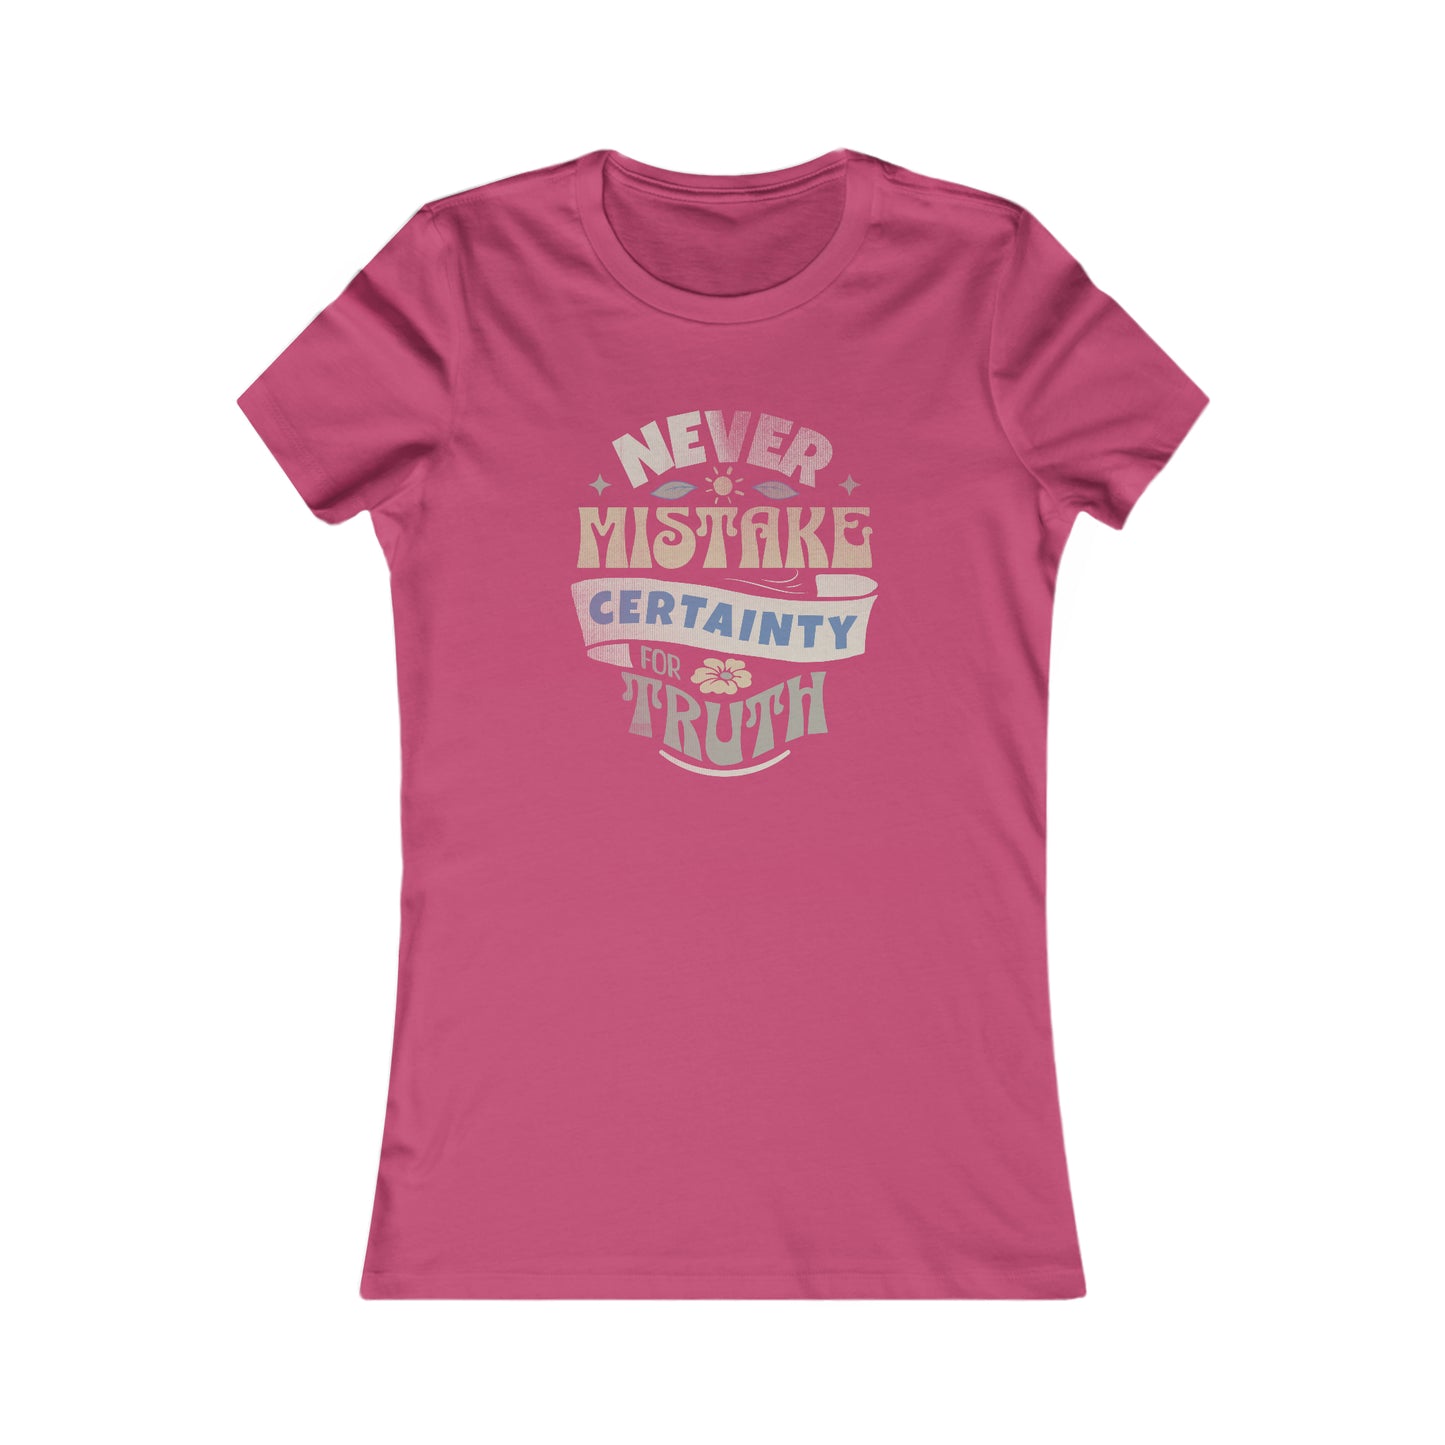 Never Mistake Certainty For Truth Women's Favorite Tee